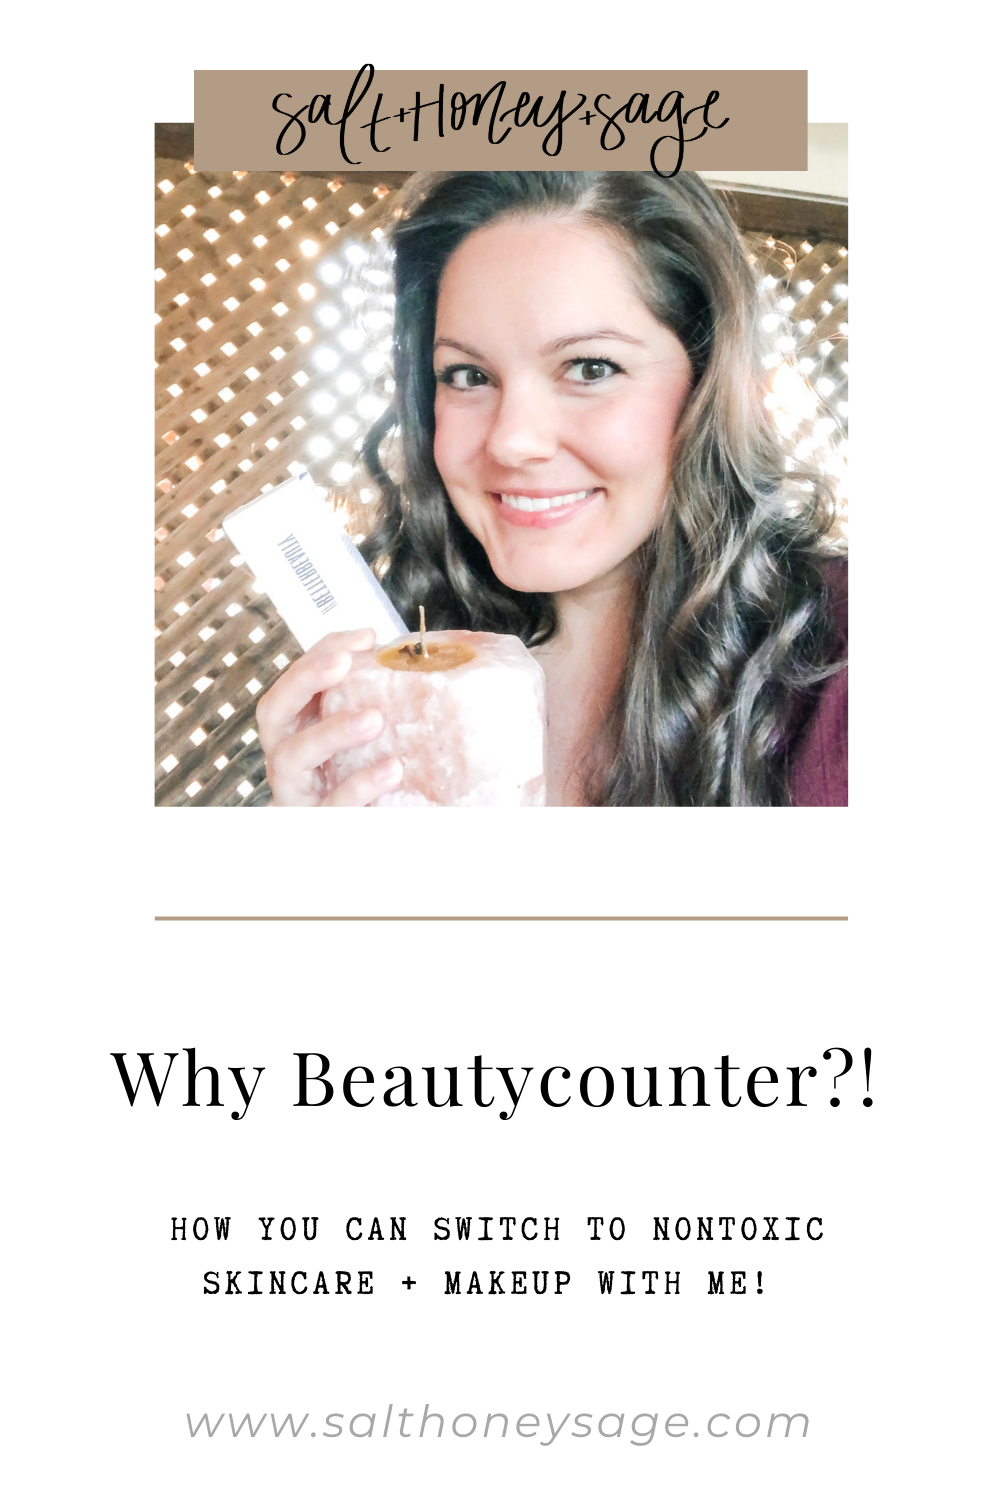 Why Beautycounter?! How you can switch to nontoxic skincare + makeup with me!